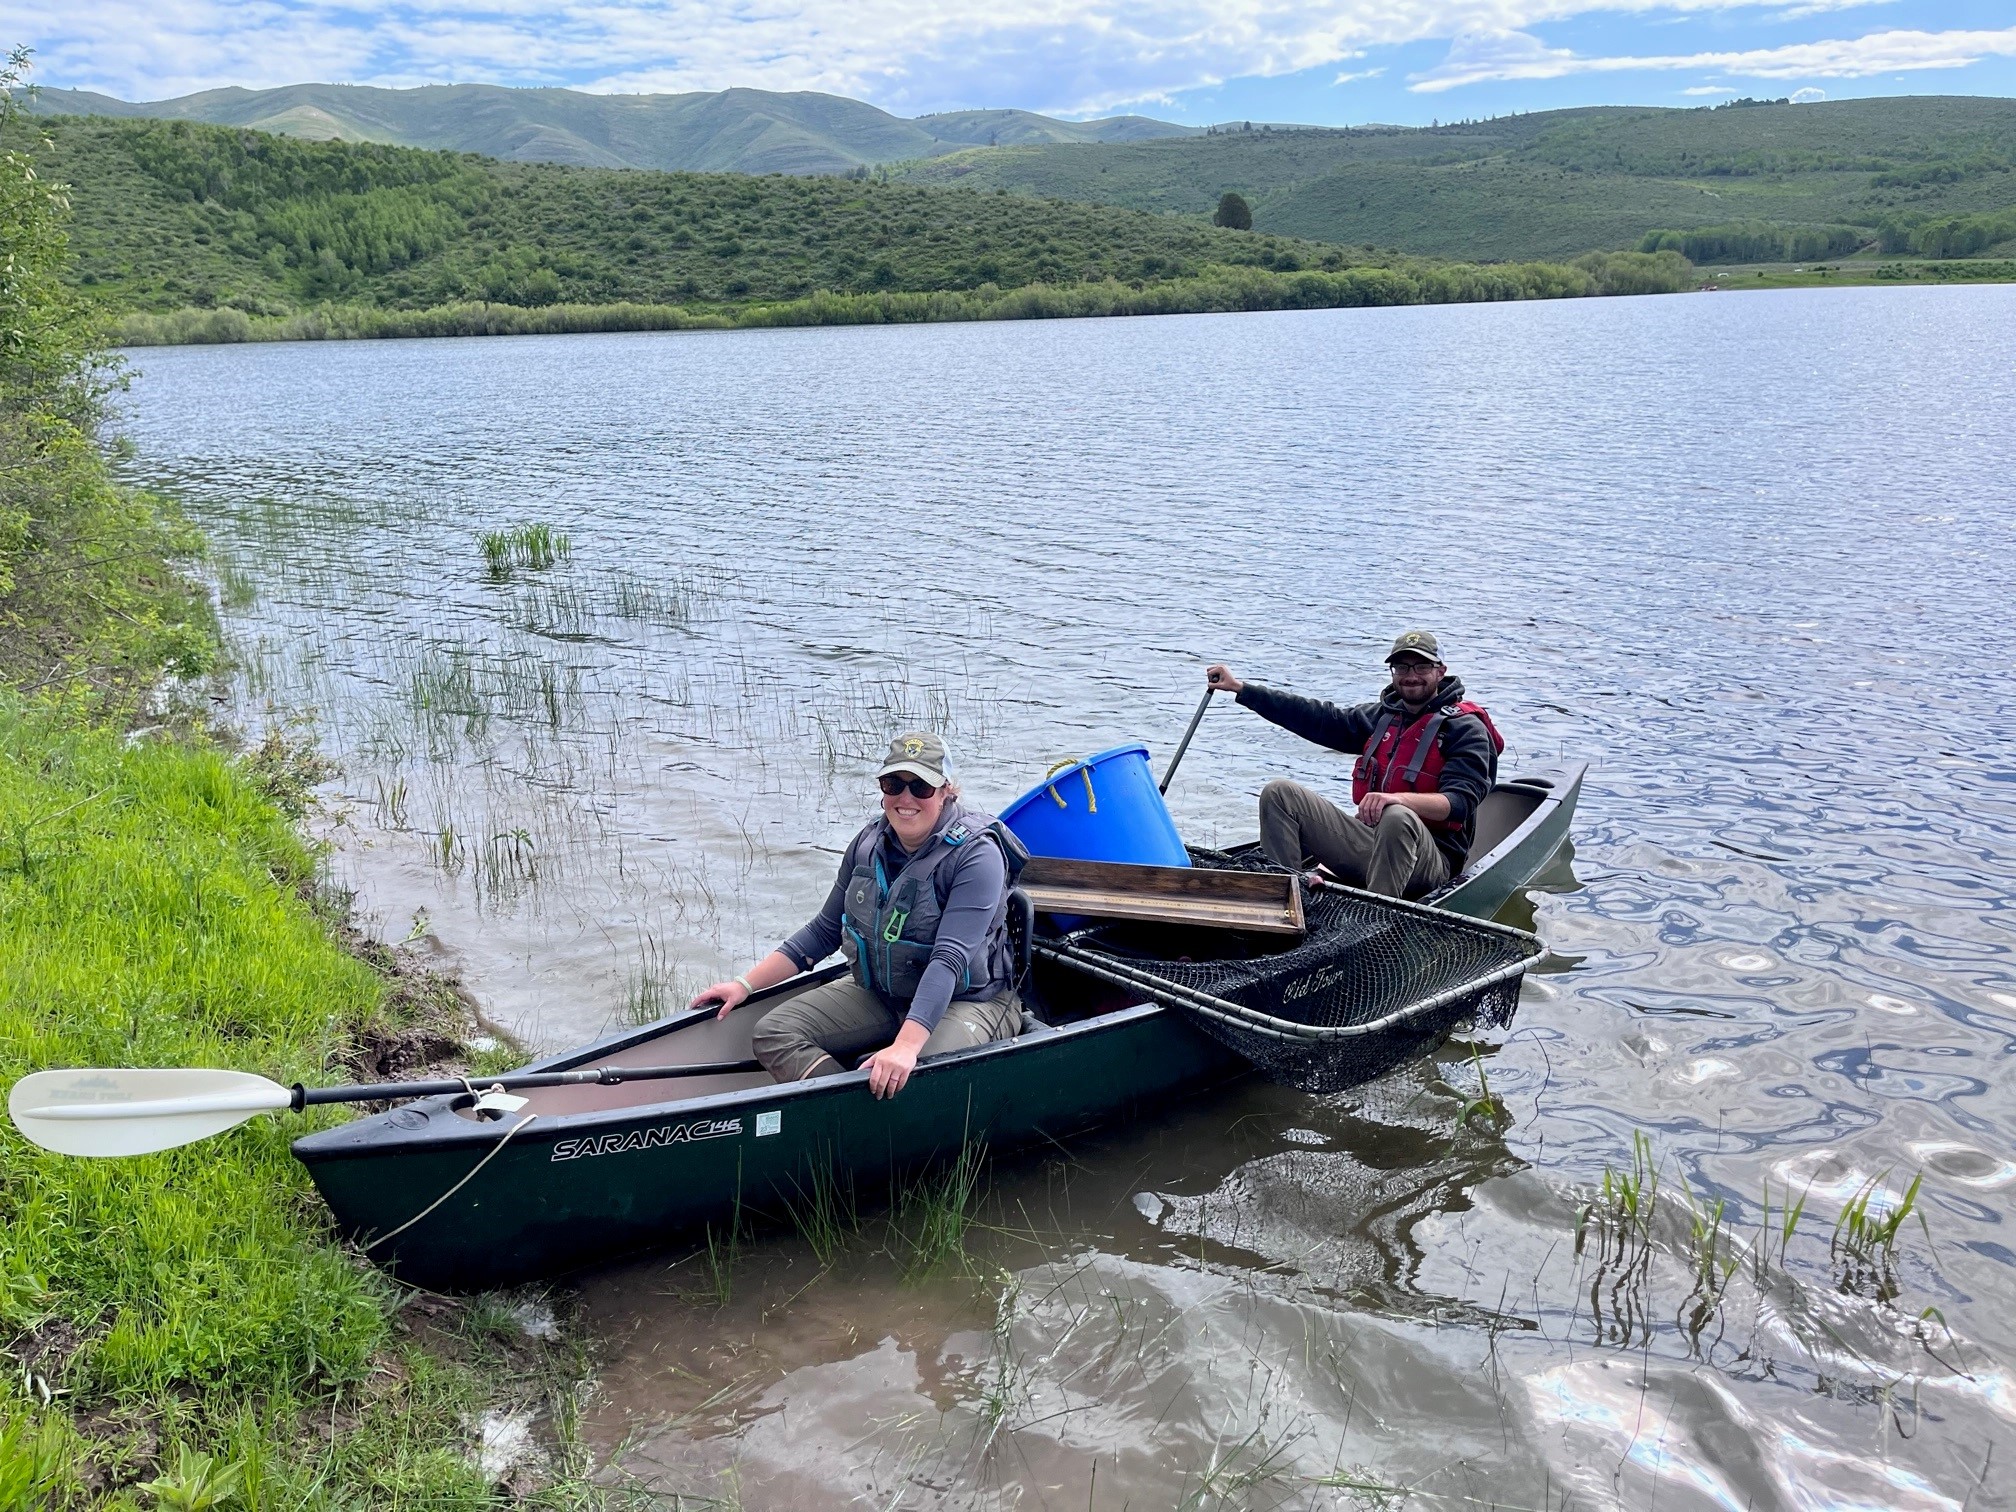 Fisheries staff set gillnets and trapnets from a canoe on Twentyfour Mile Reservoir. 